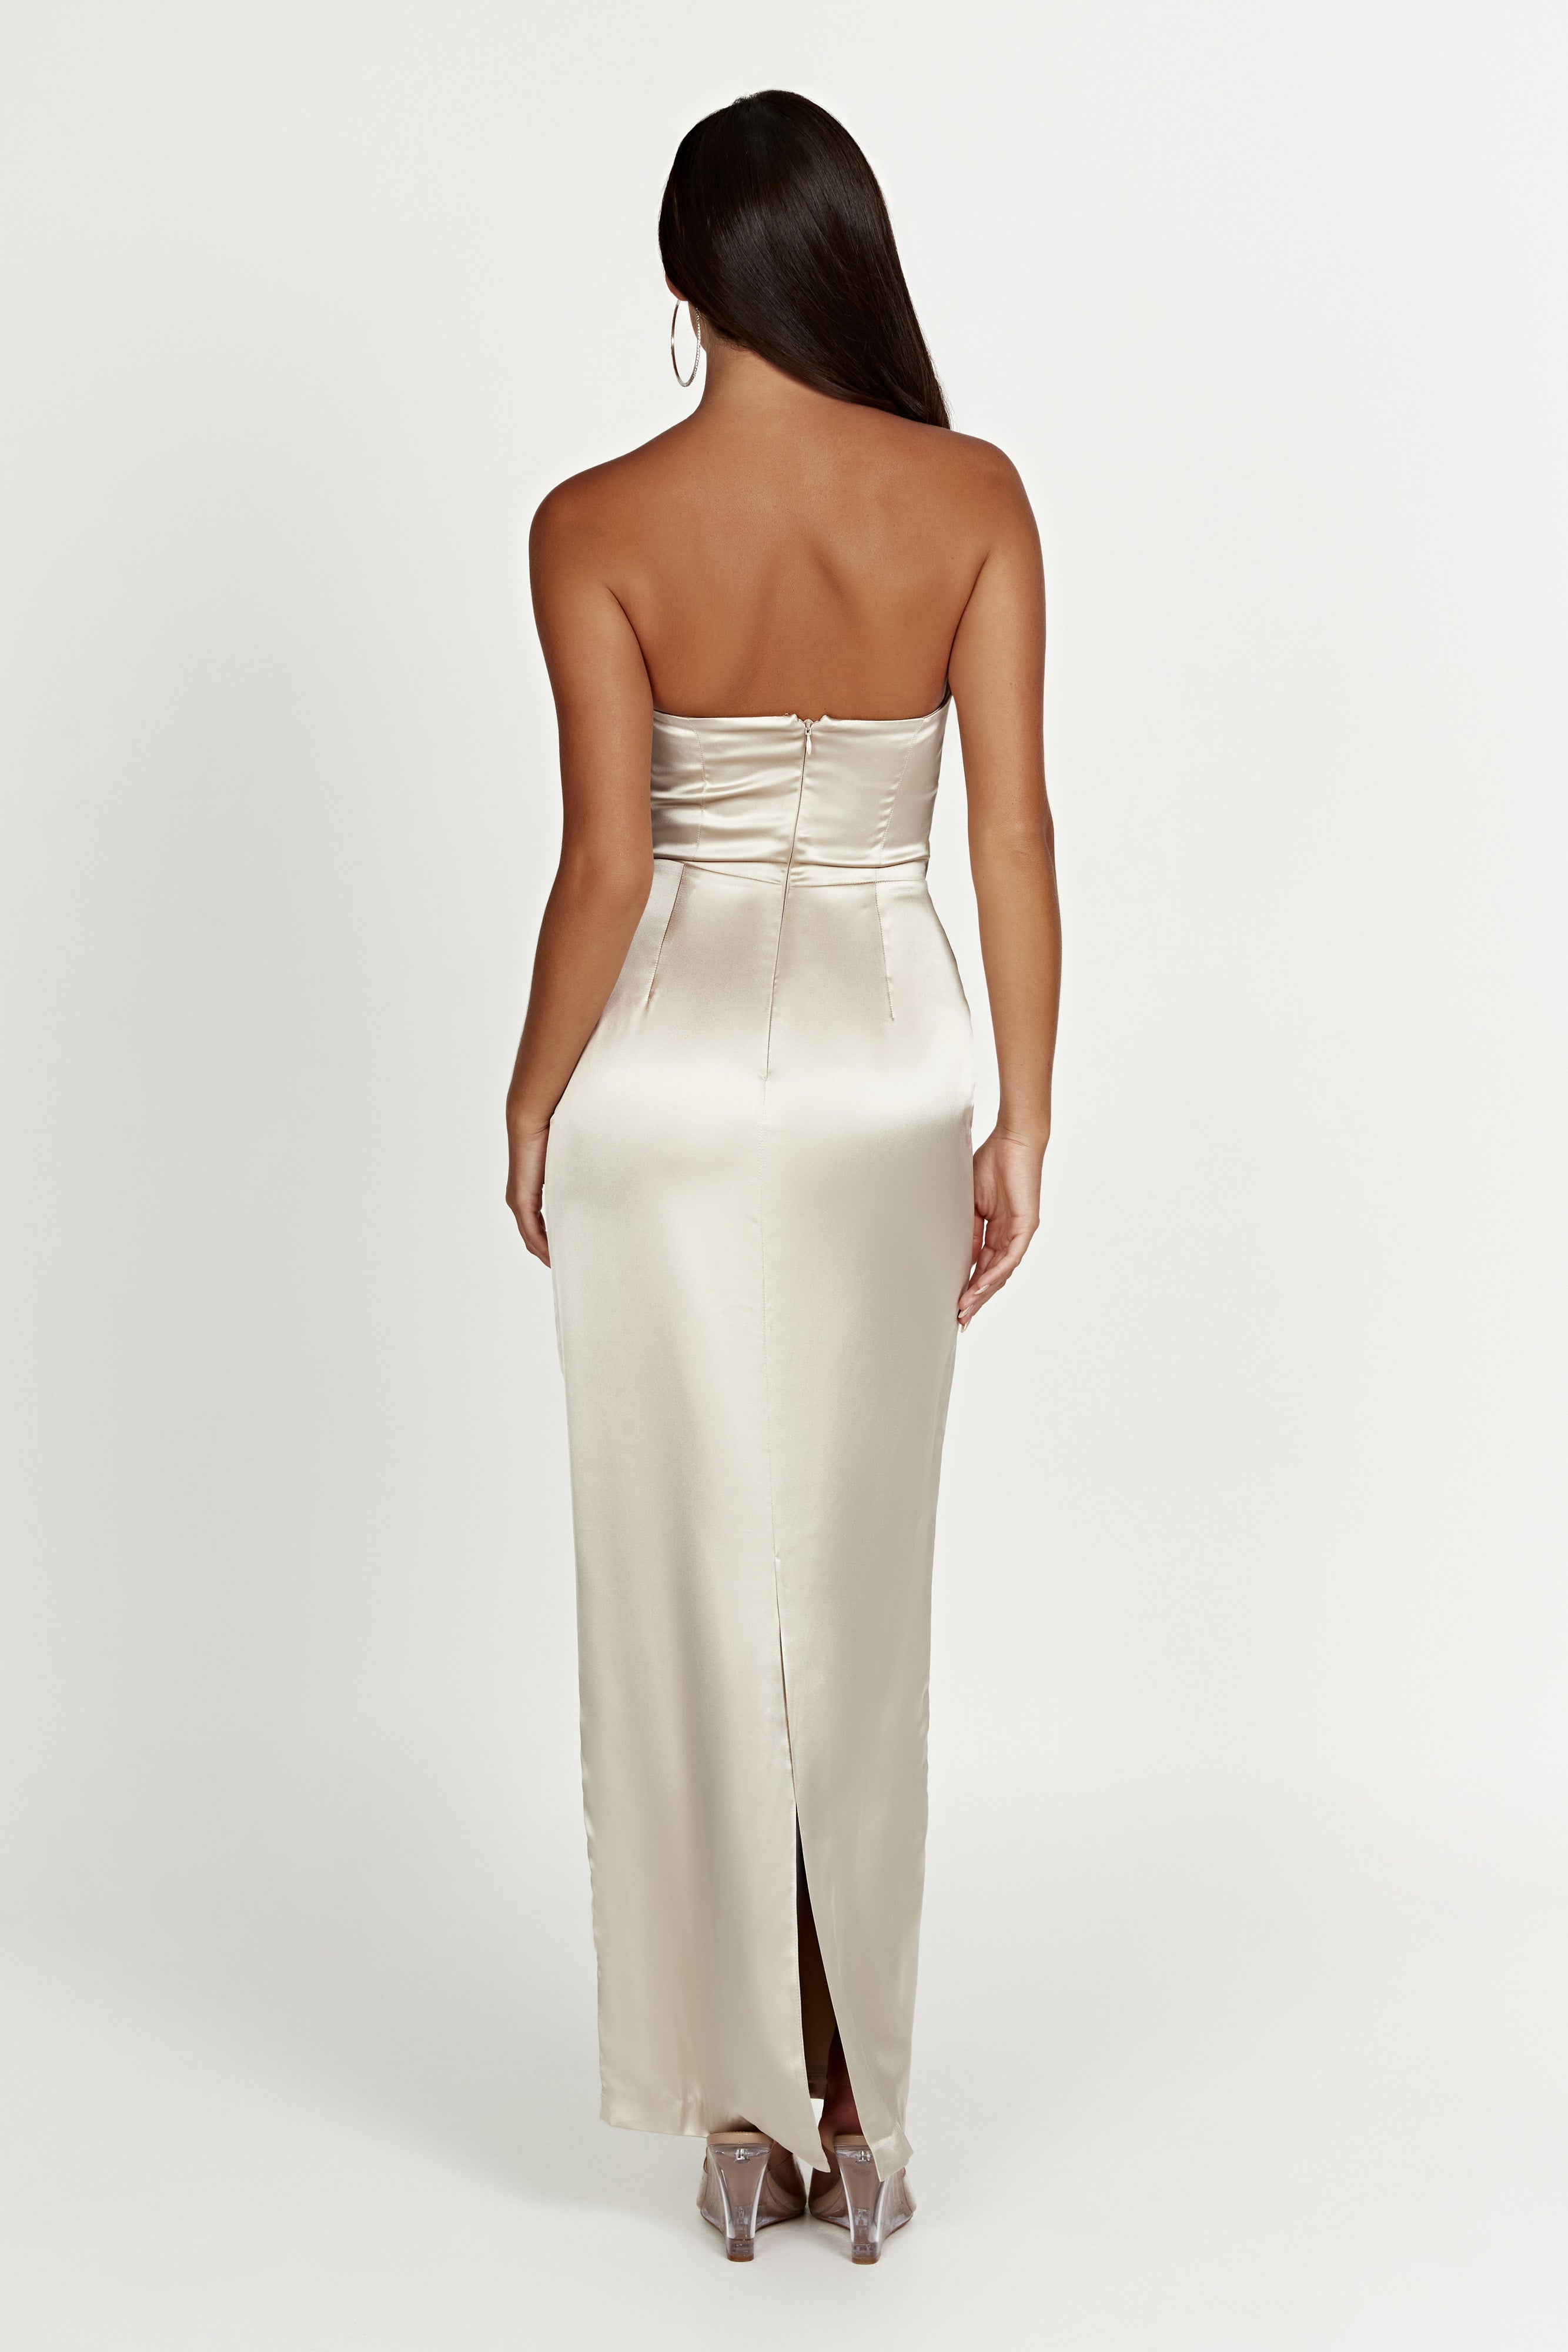 Alanis Strapless Maxi Dress – Champagne